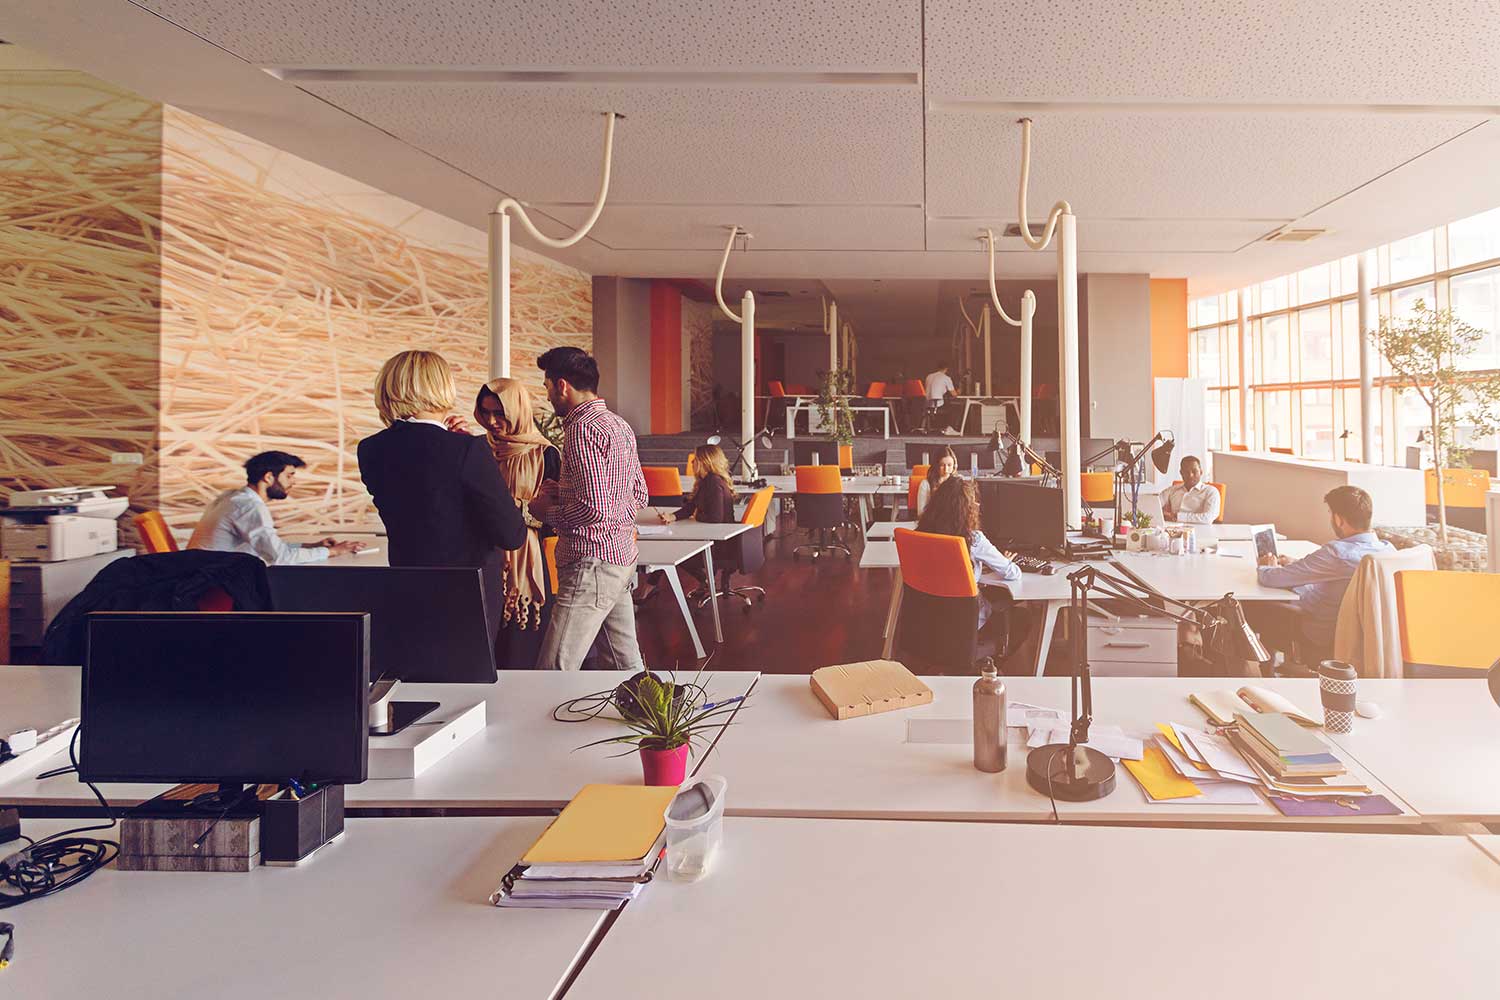 People are seen walking about an open-space work area in an office.